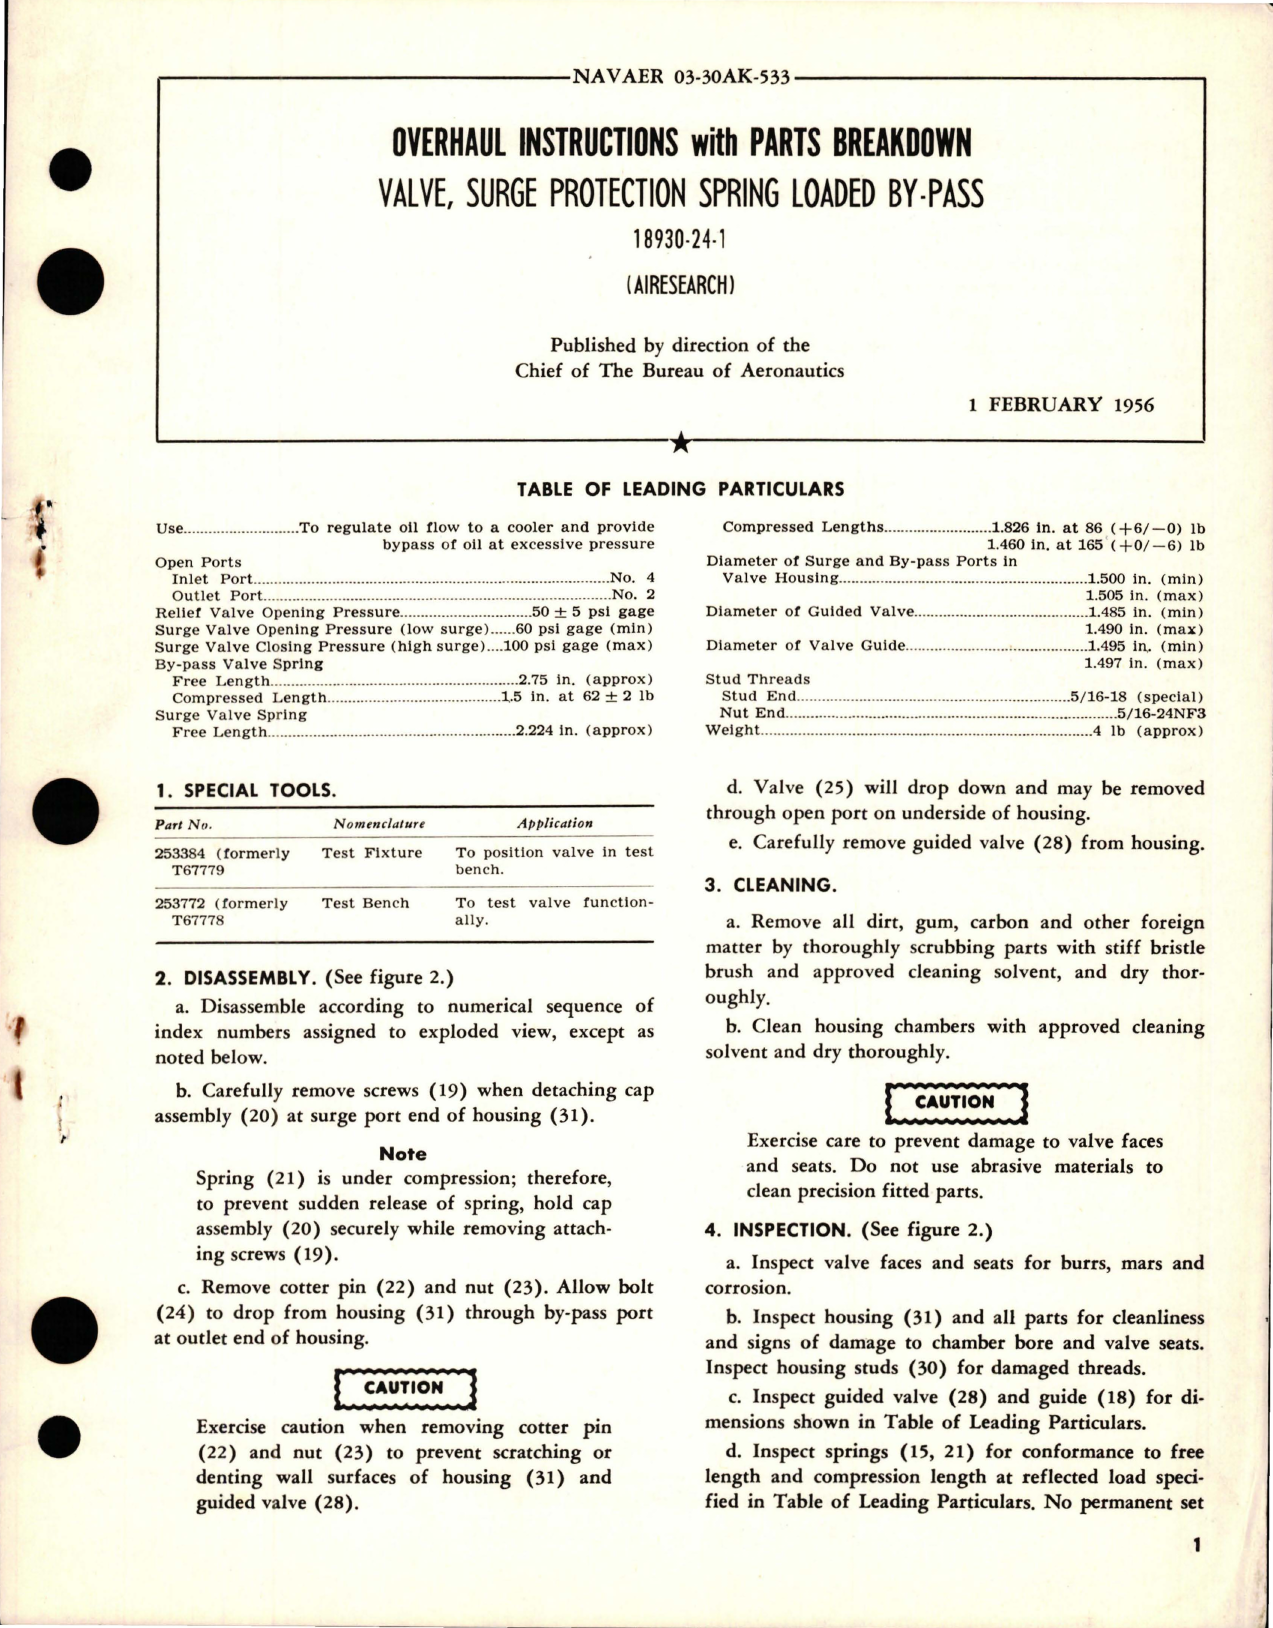 Sample page 1 from AirCorps Library document: Overhaul Instructions with Parts Breakdown for Surge Protection Spring Loaded By-Pass Valve - 18930-24-1